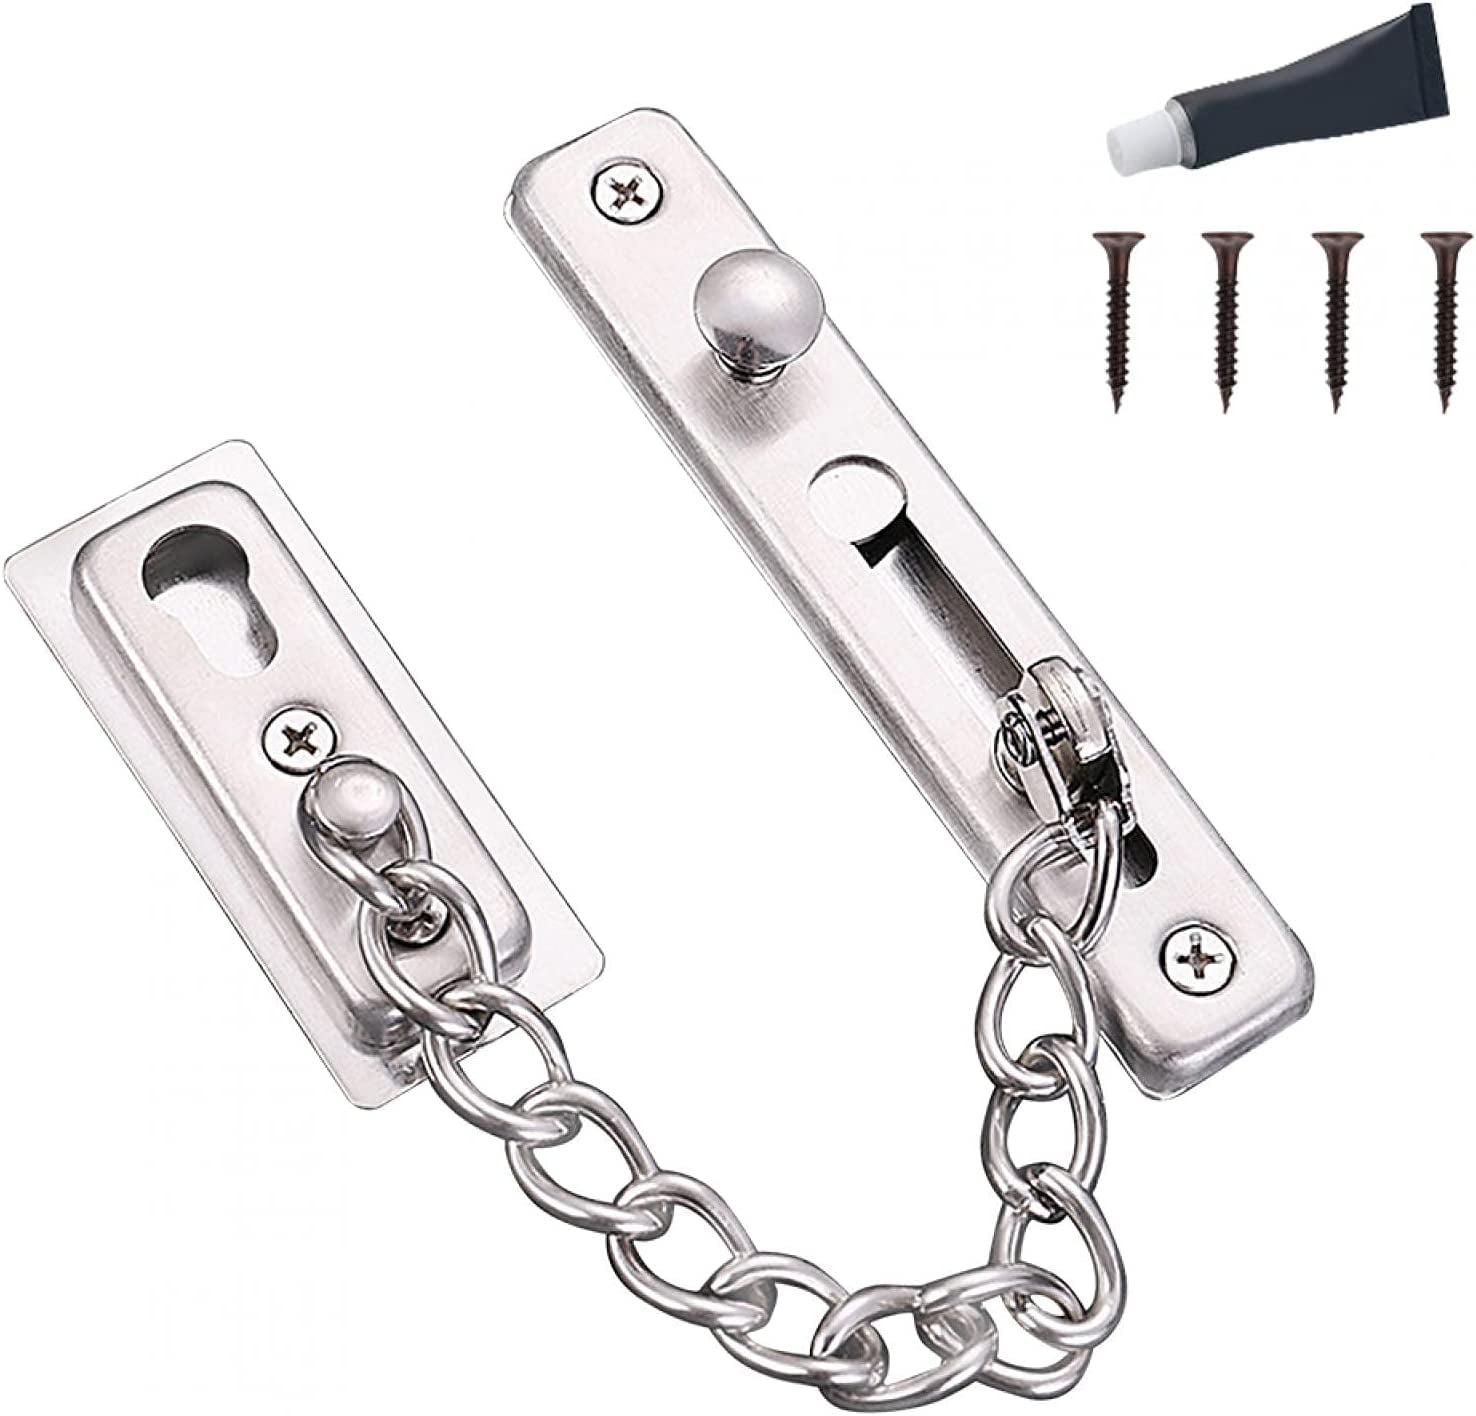 Door Chain Lock. Stainless Steel Security Chain Guard with an ti